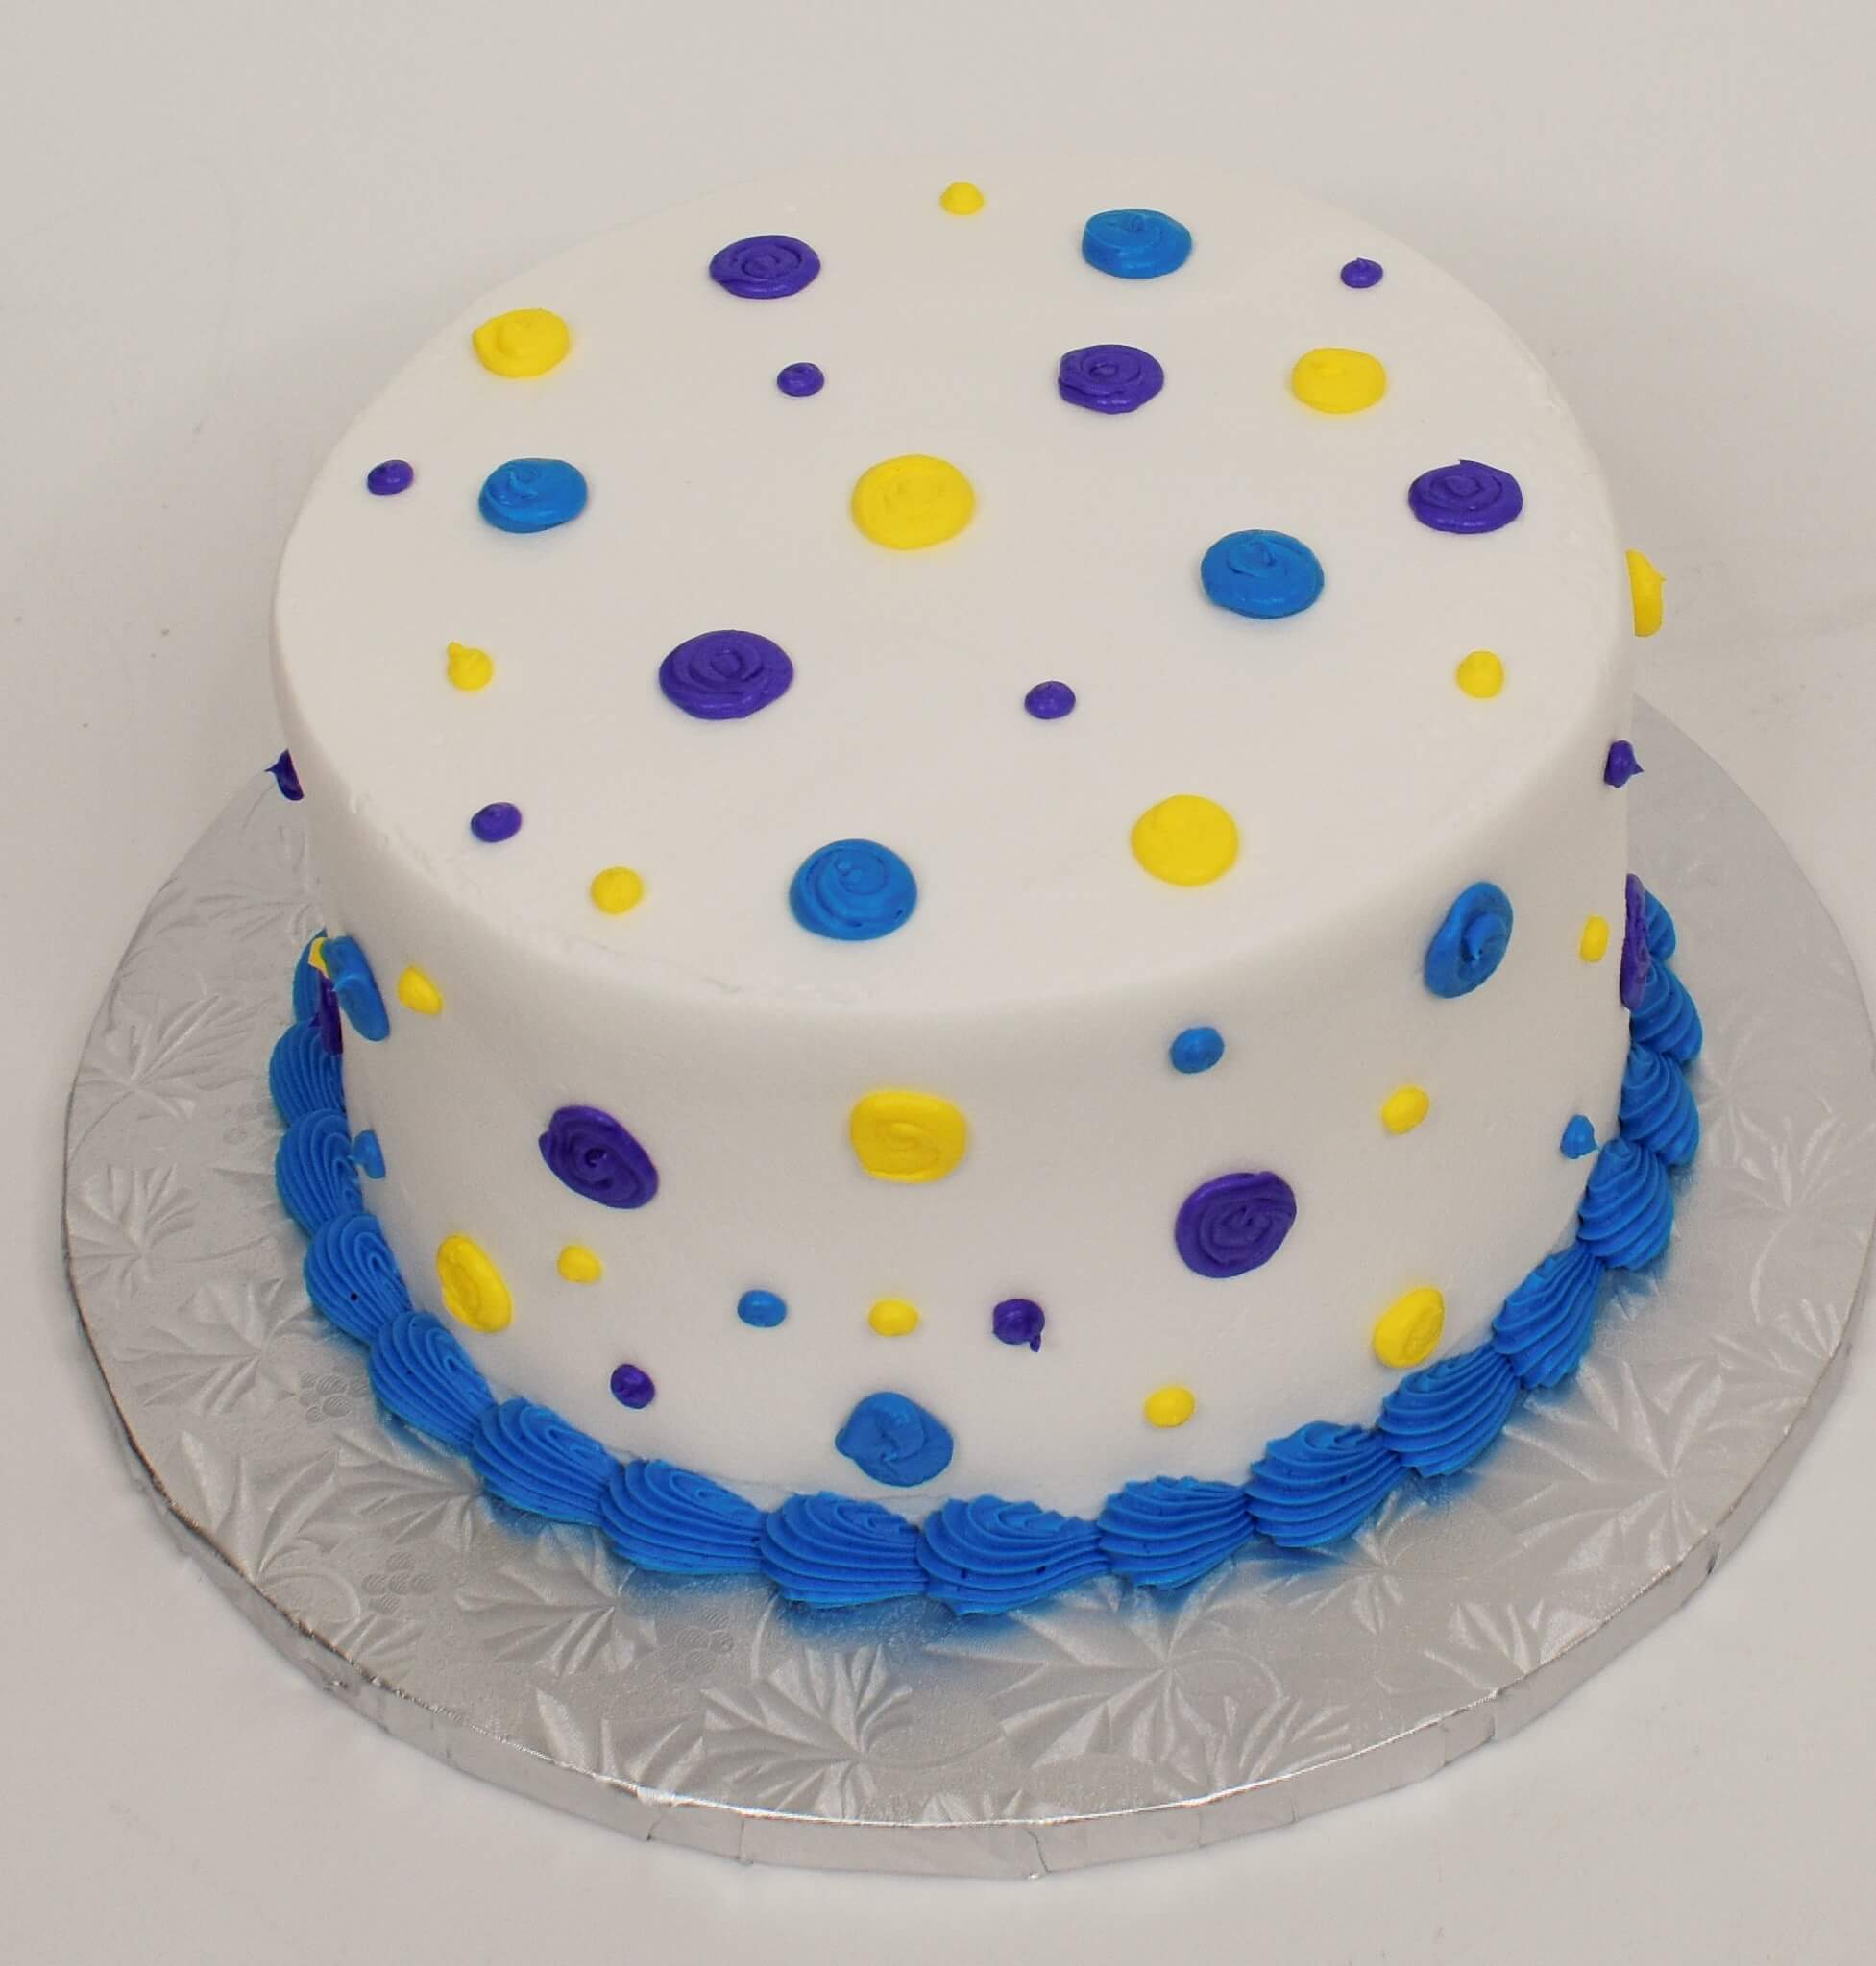 McArthur's Bakery Custom Cake With Yellow, Blue, And Purple Polka Dots